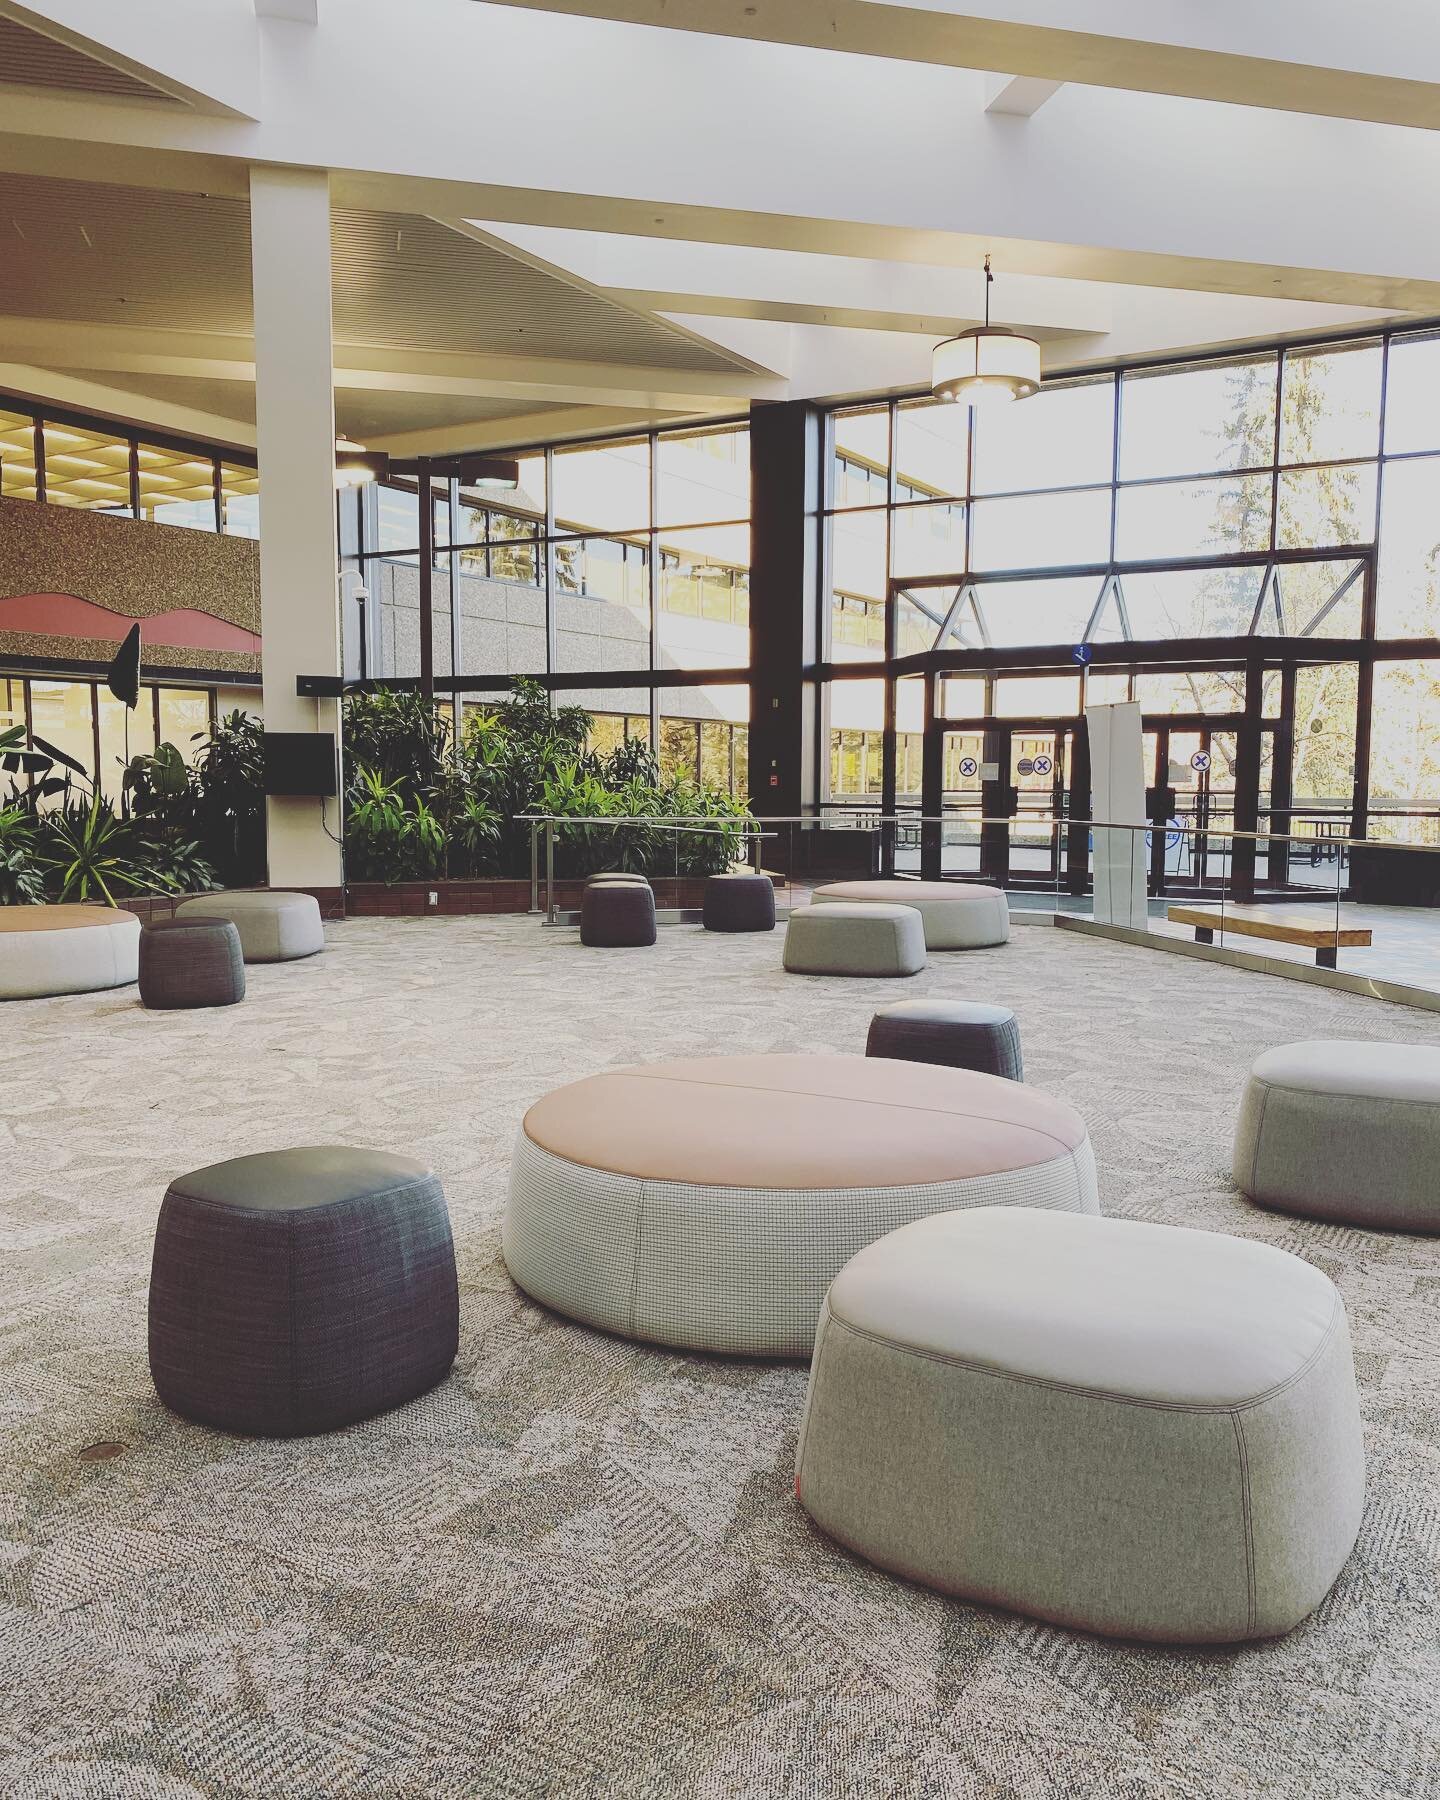 The challenge in phased interior refreshes is ensuring that the existing and the new meld together symbiotically while in transition. The materials for these @haworthinc poufs were carefully composed creating a result that elevated the existing surro